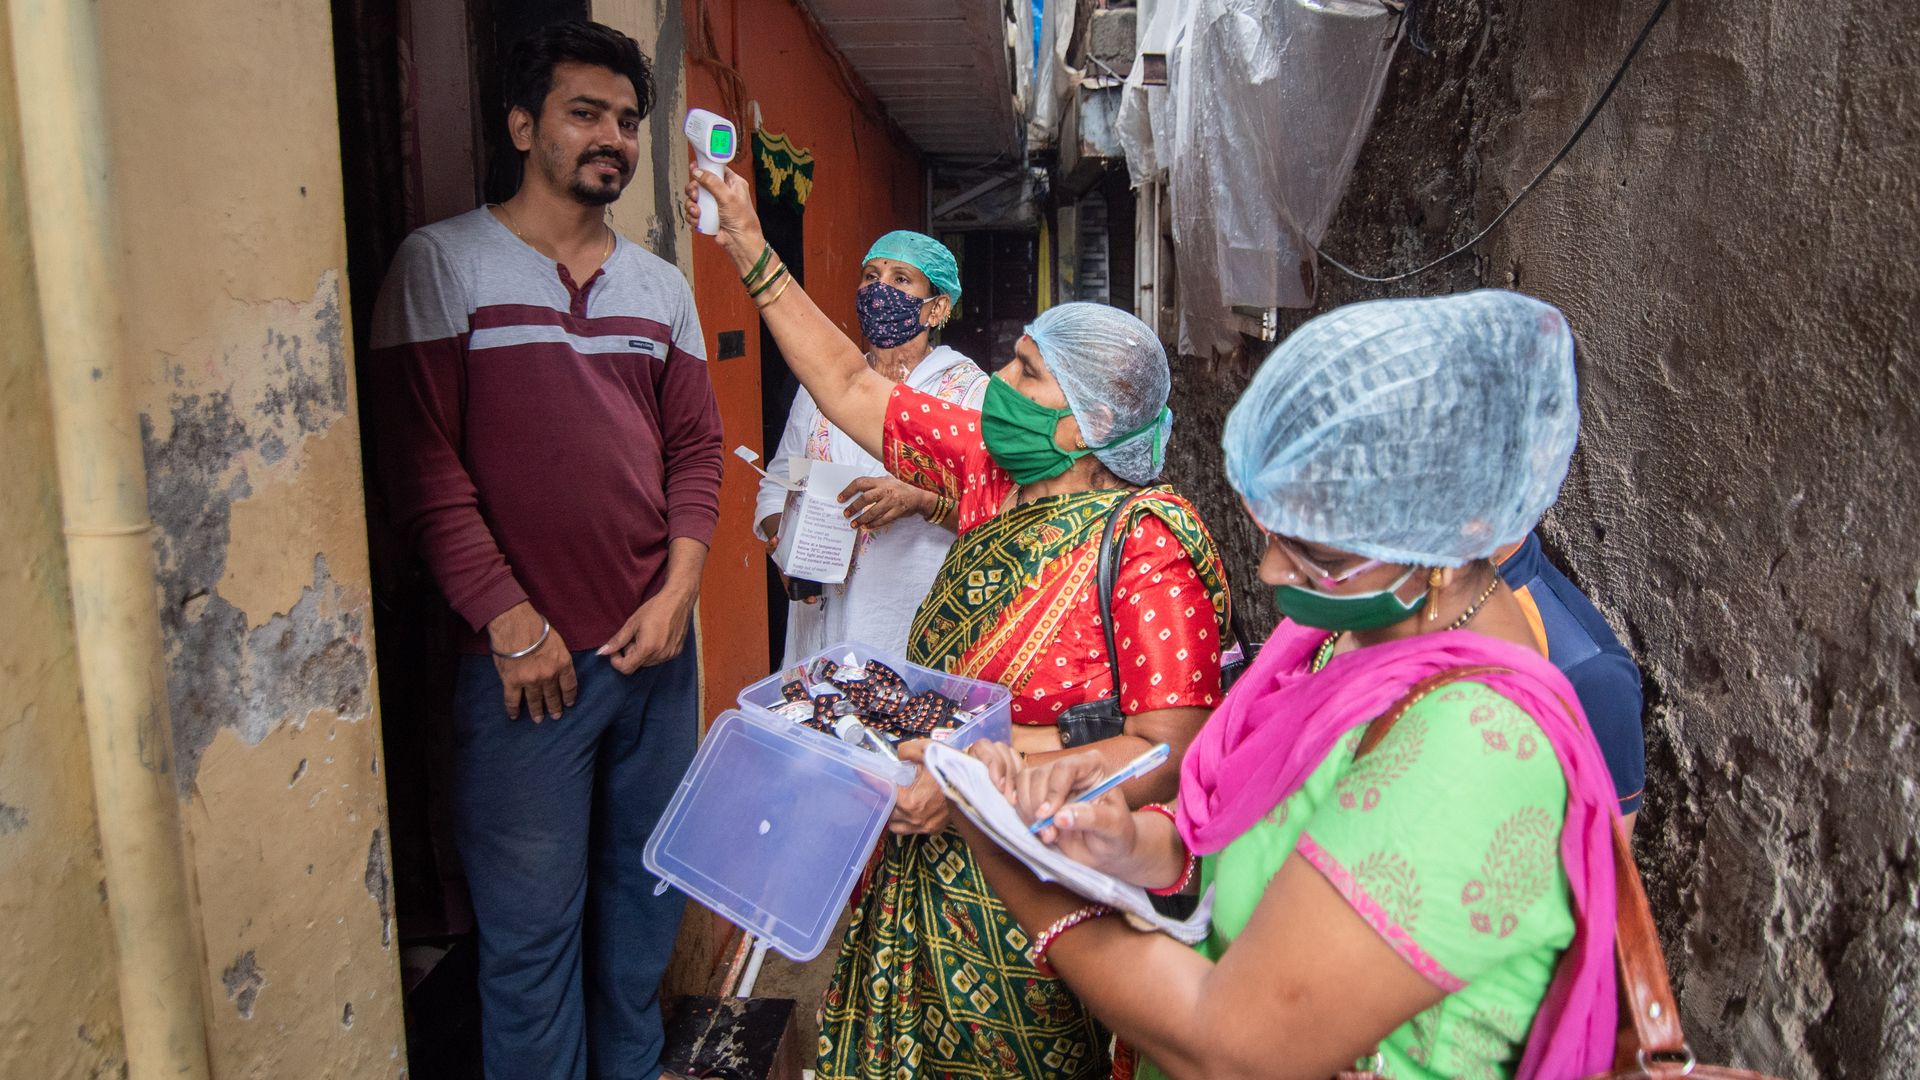  Health care workers during door to door screening of Temperature and Oxygen level test at Saki naka during Covid-19 pandemic, on August 30, 2020 in Mumbai, India. 